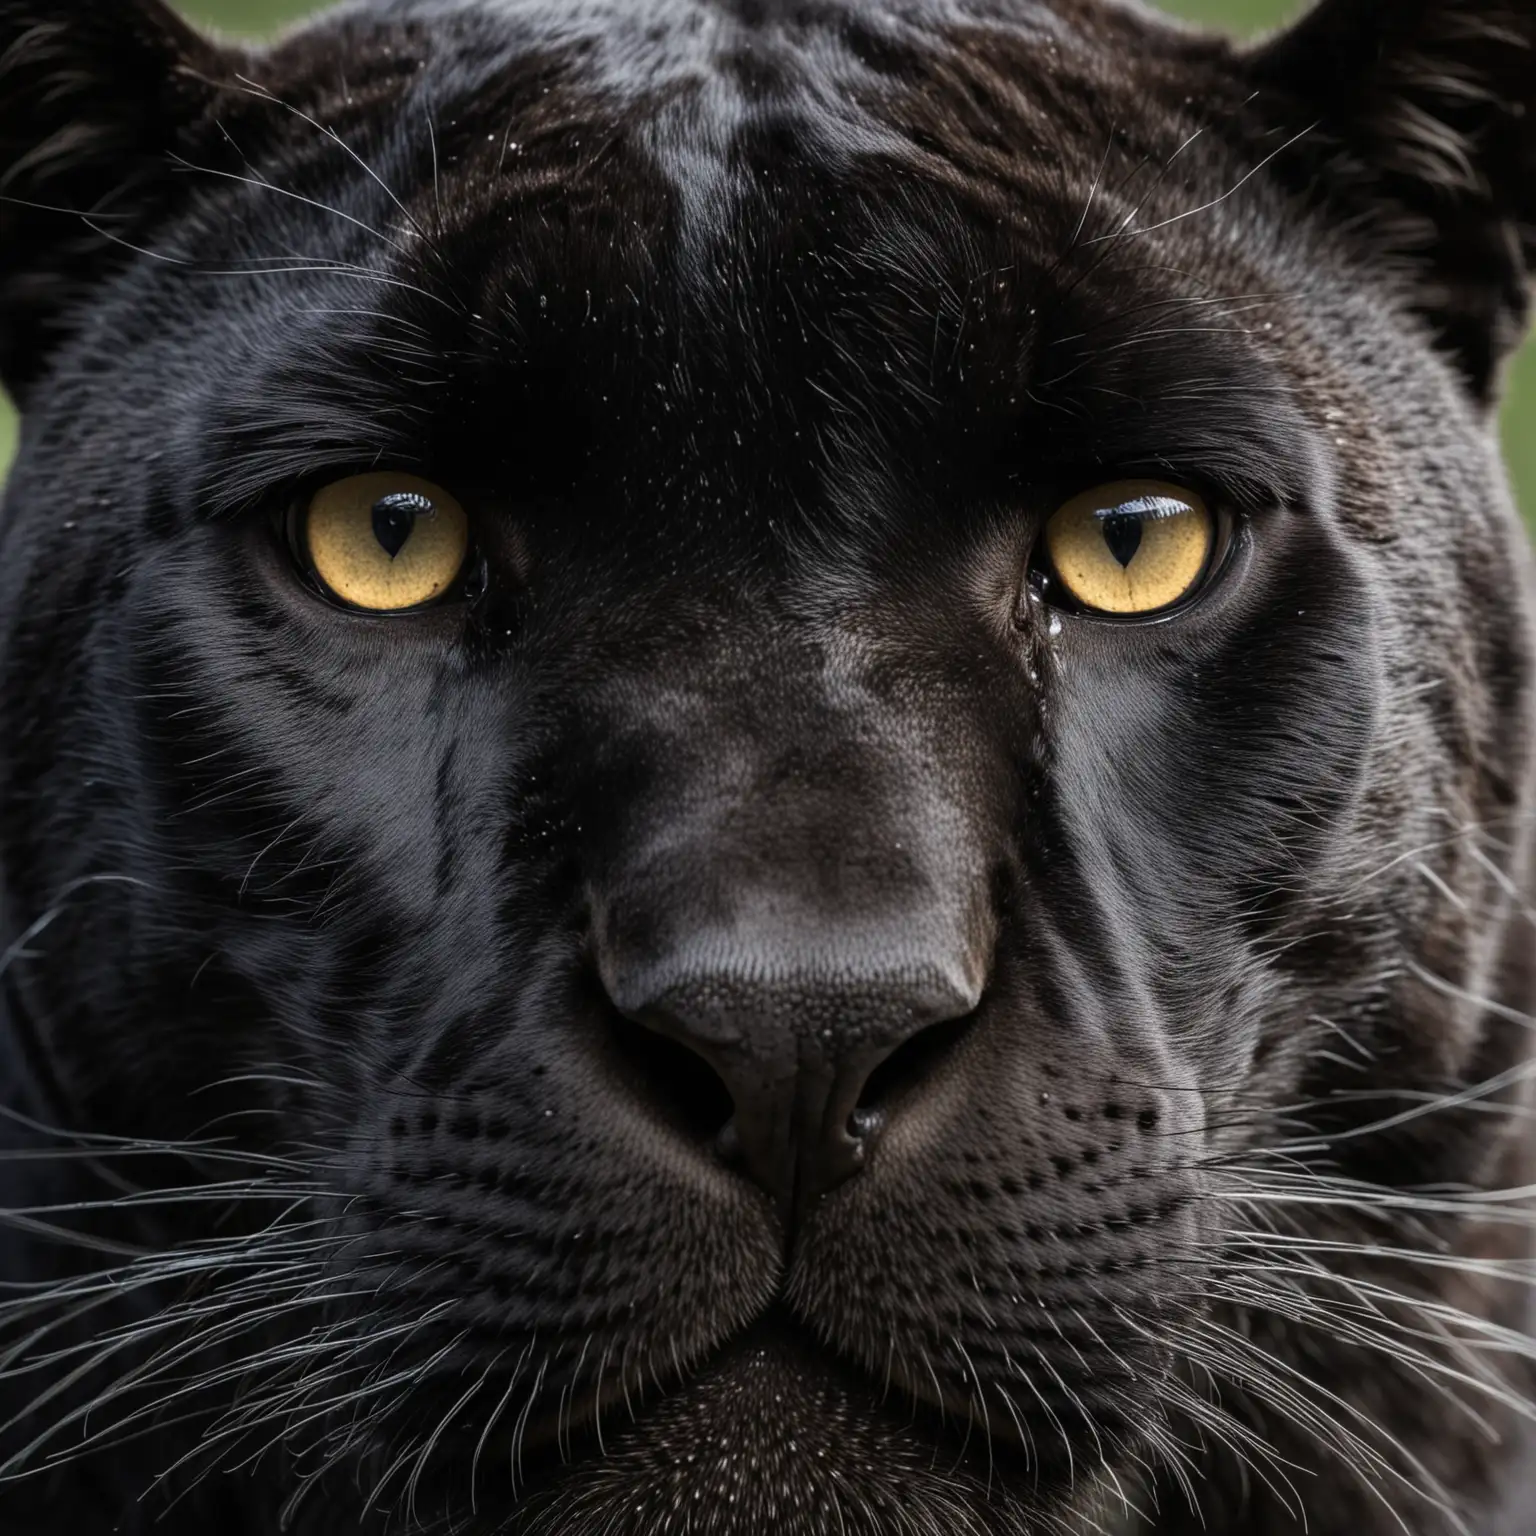 panther full face image close up